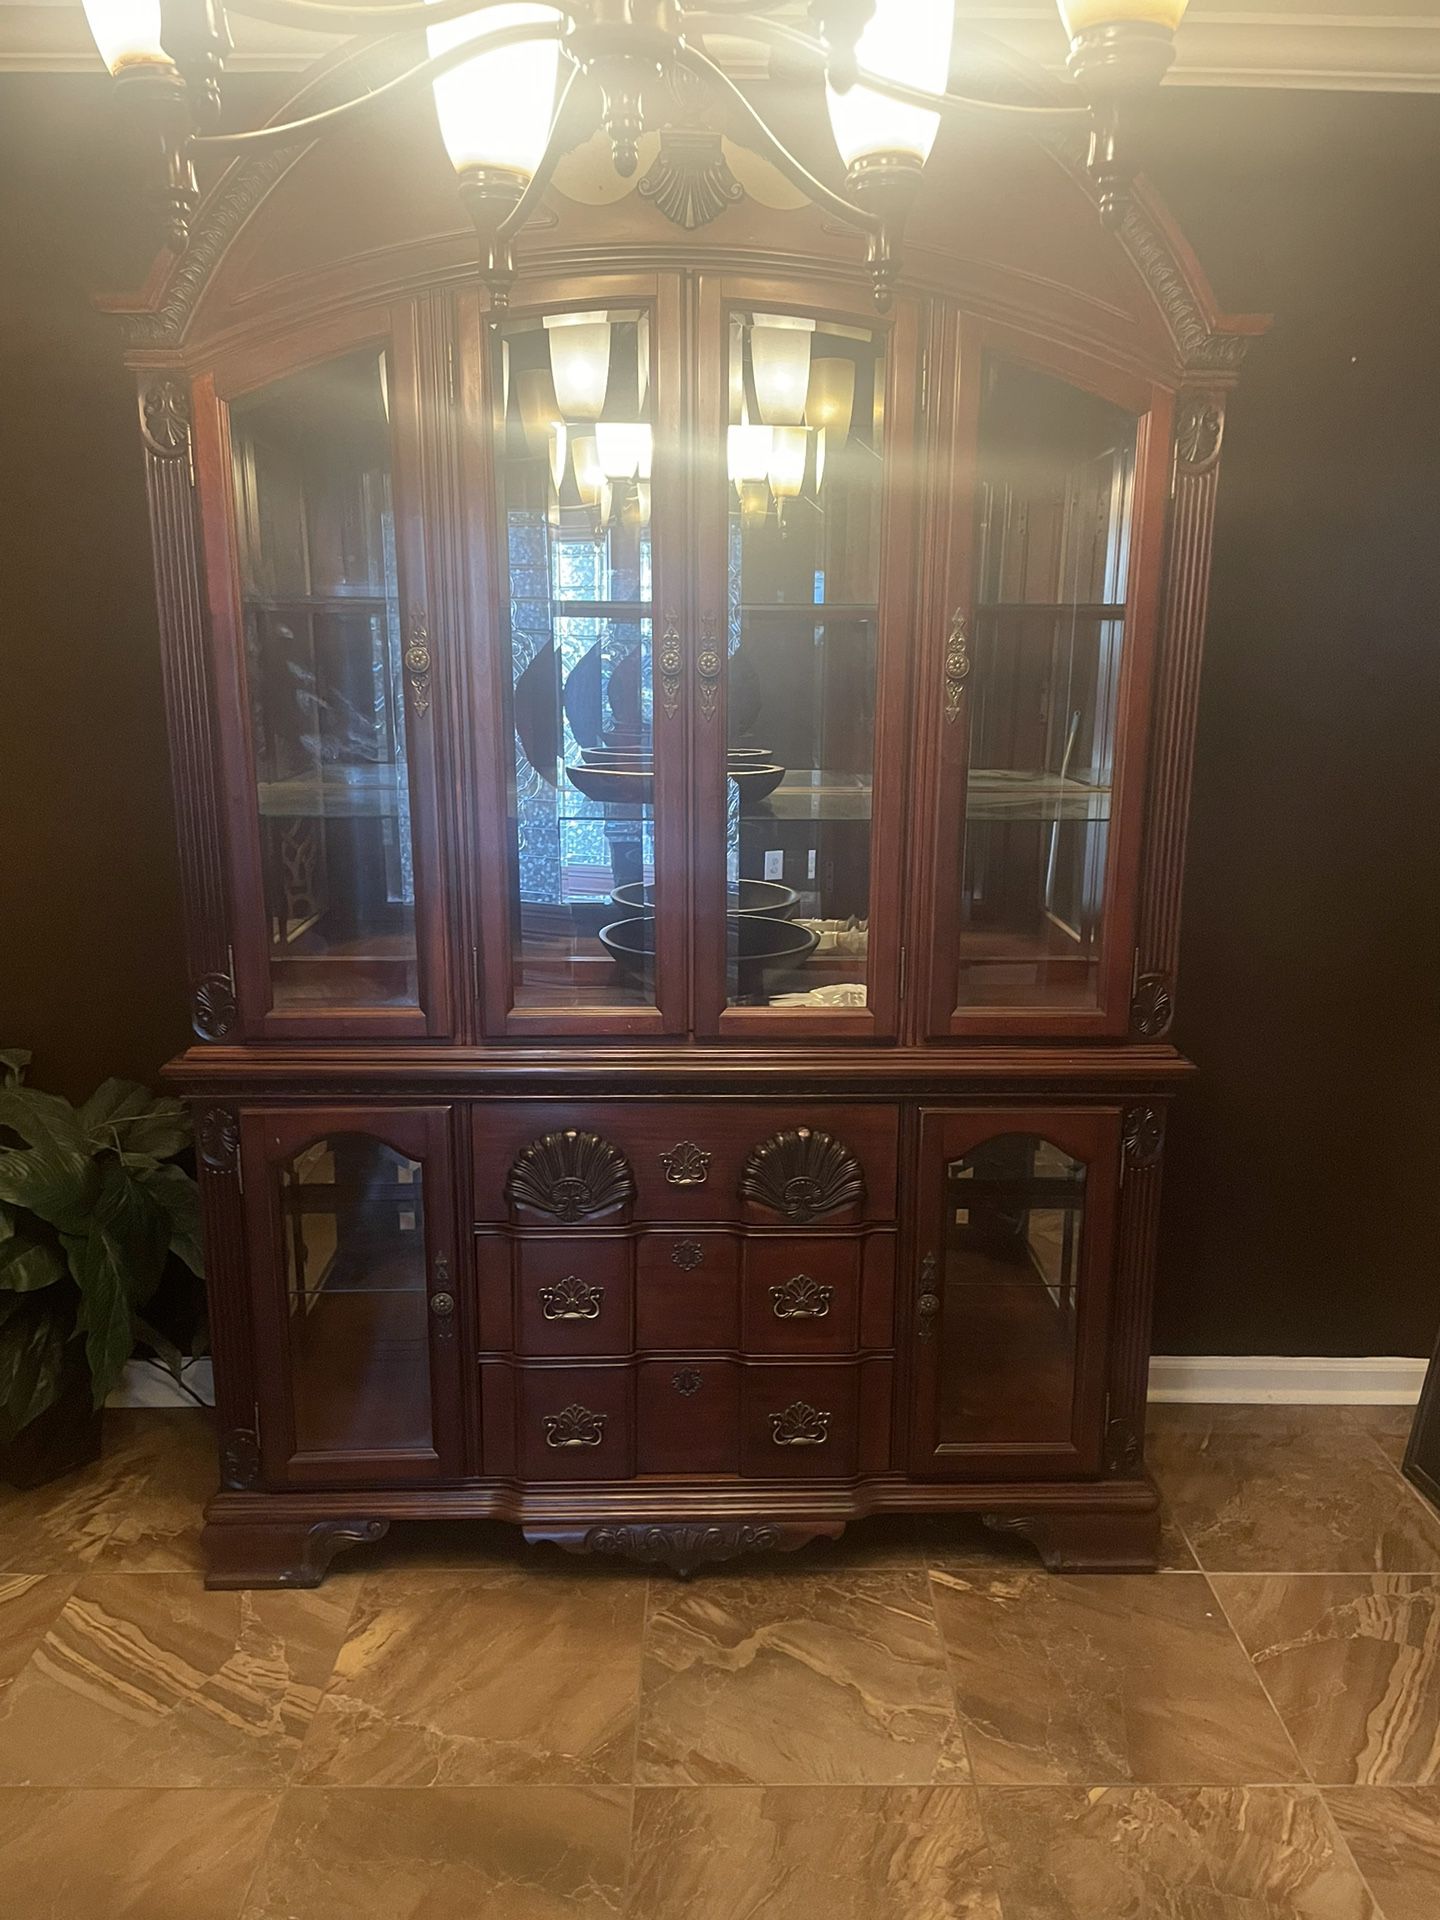 Glass Dining Table & China Cabinet